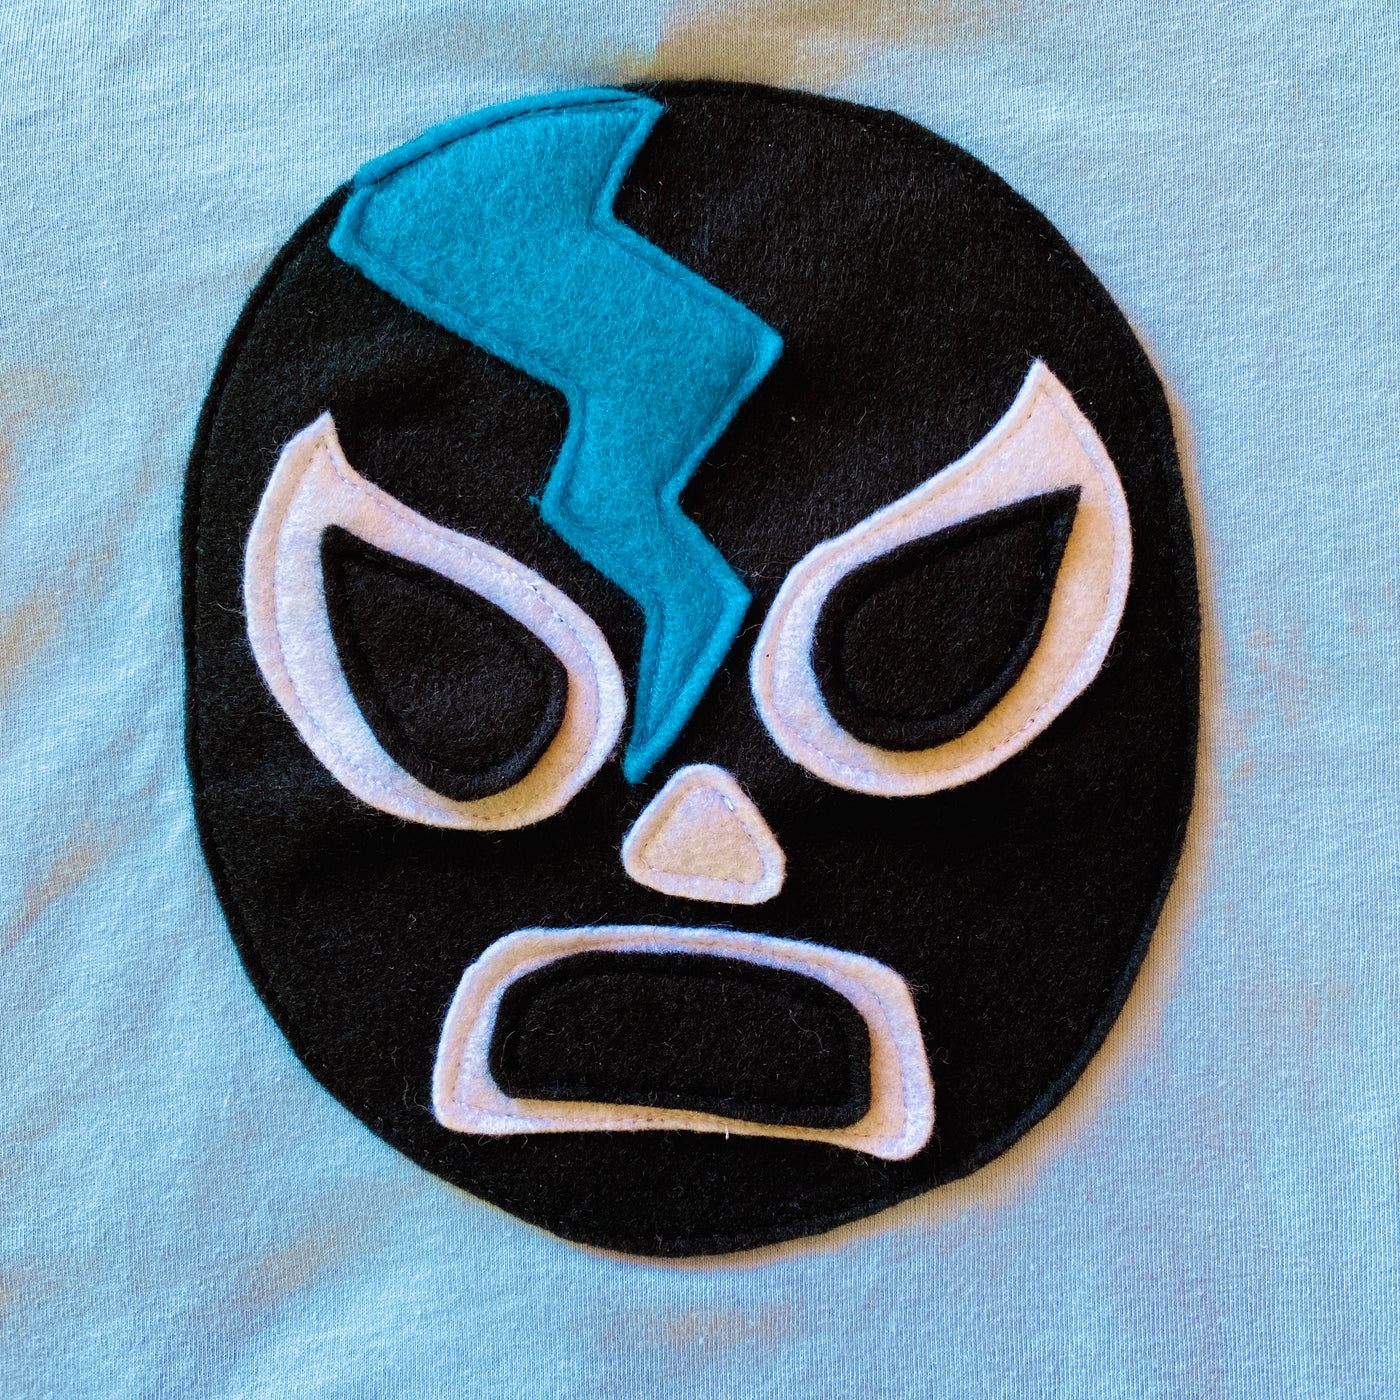 Close up of hand-stitched Luchador design on blue kid's t-shirt.